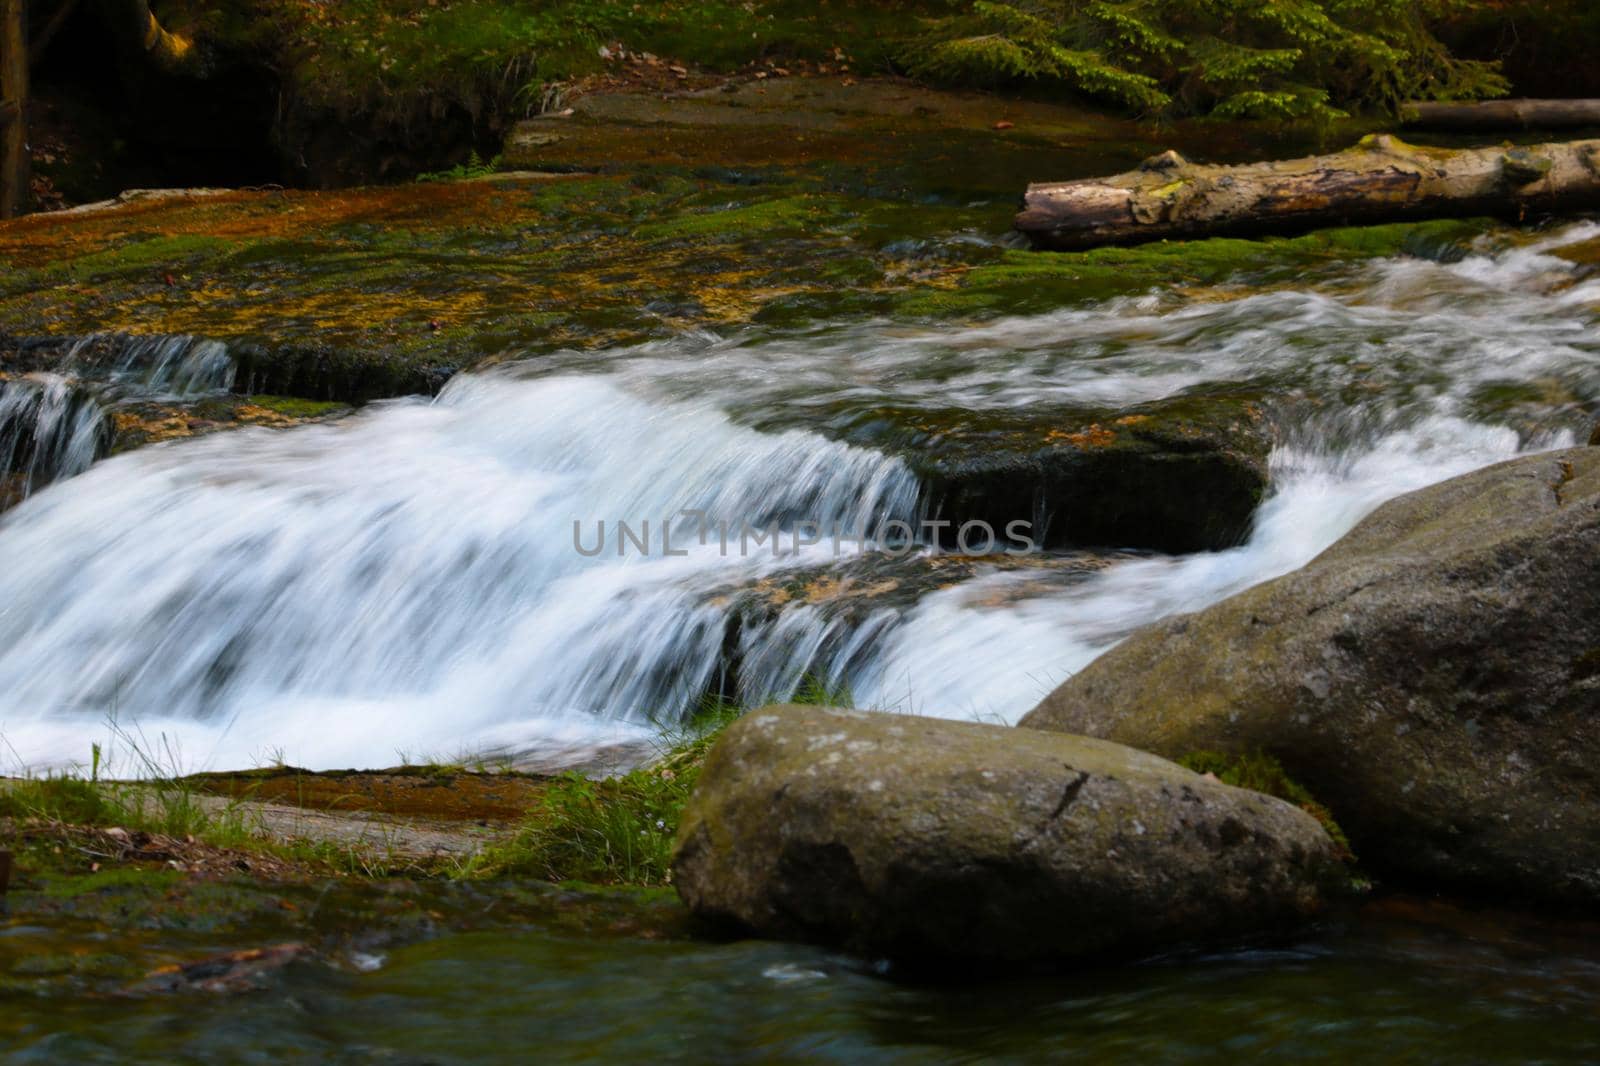 Cold clear water flows through the rocks in the forest, spring. by kip02kas